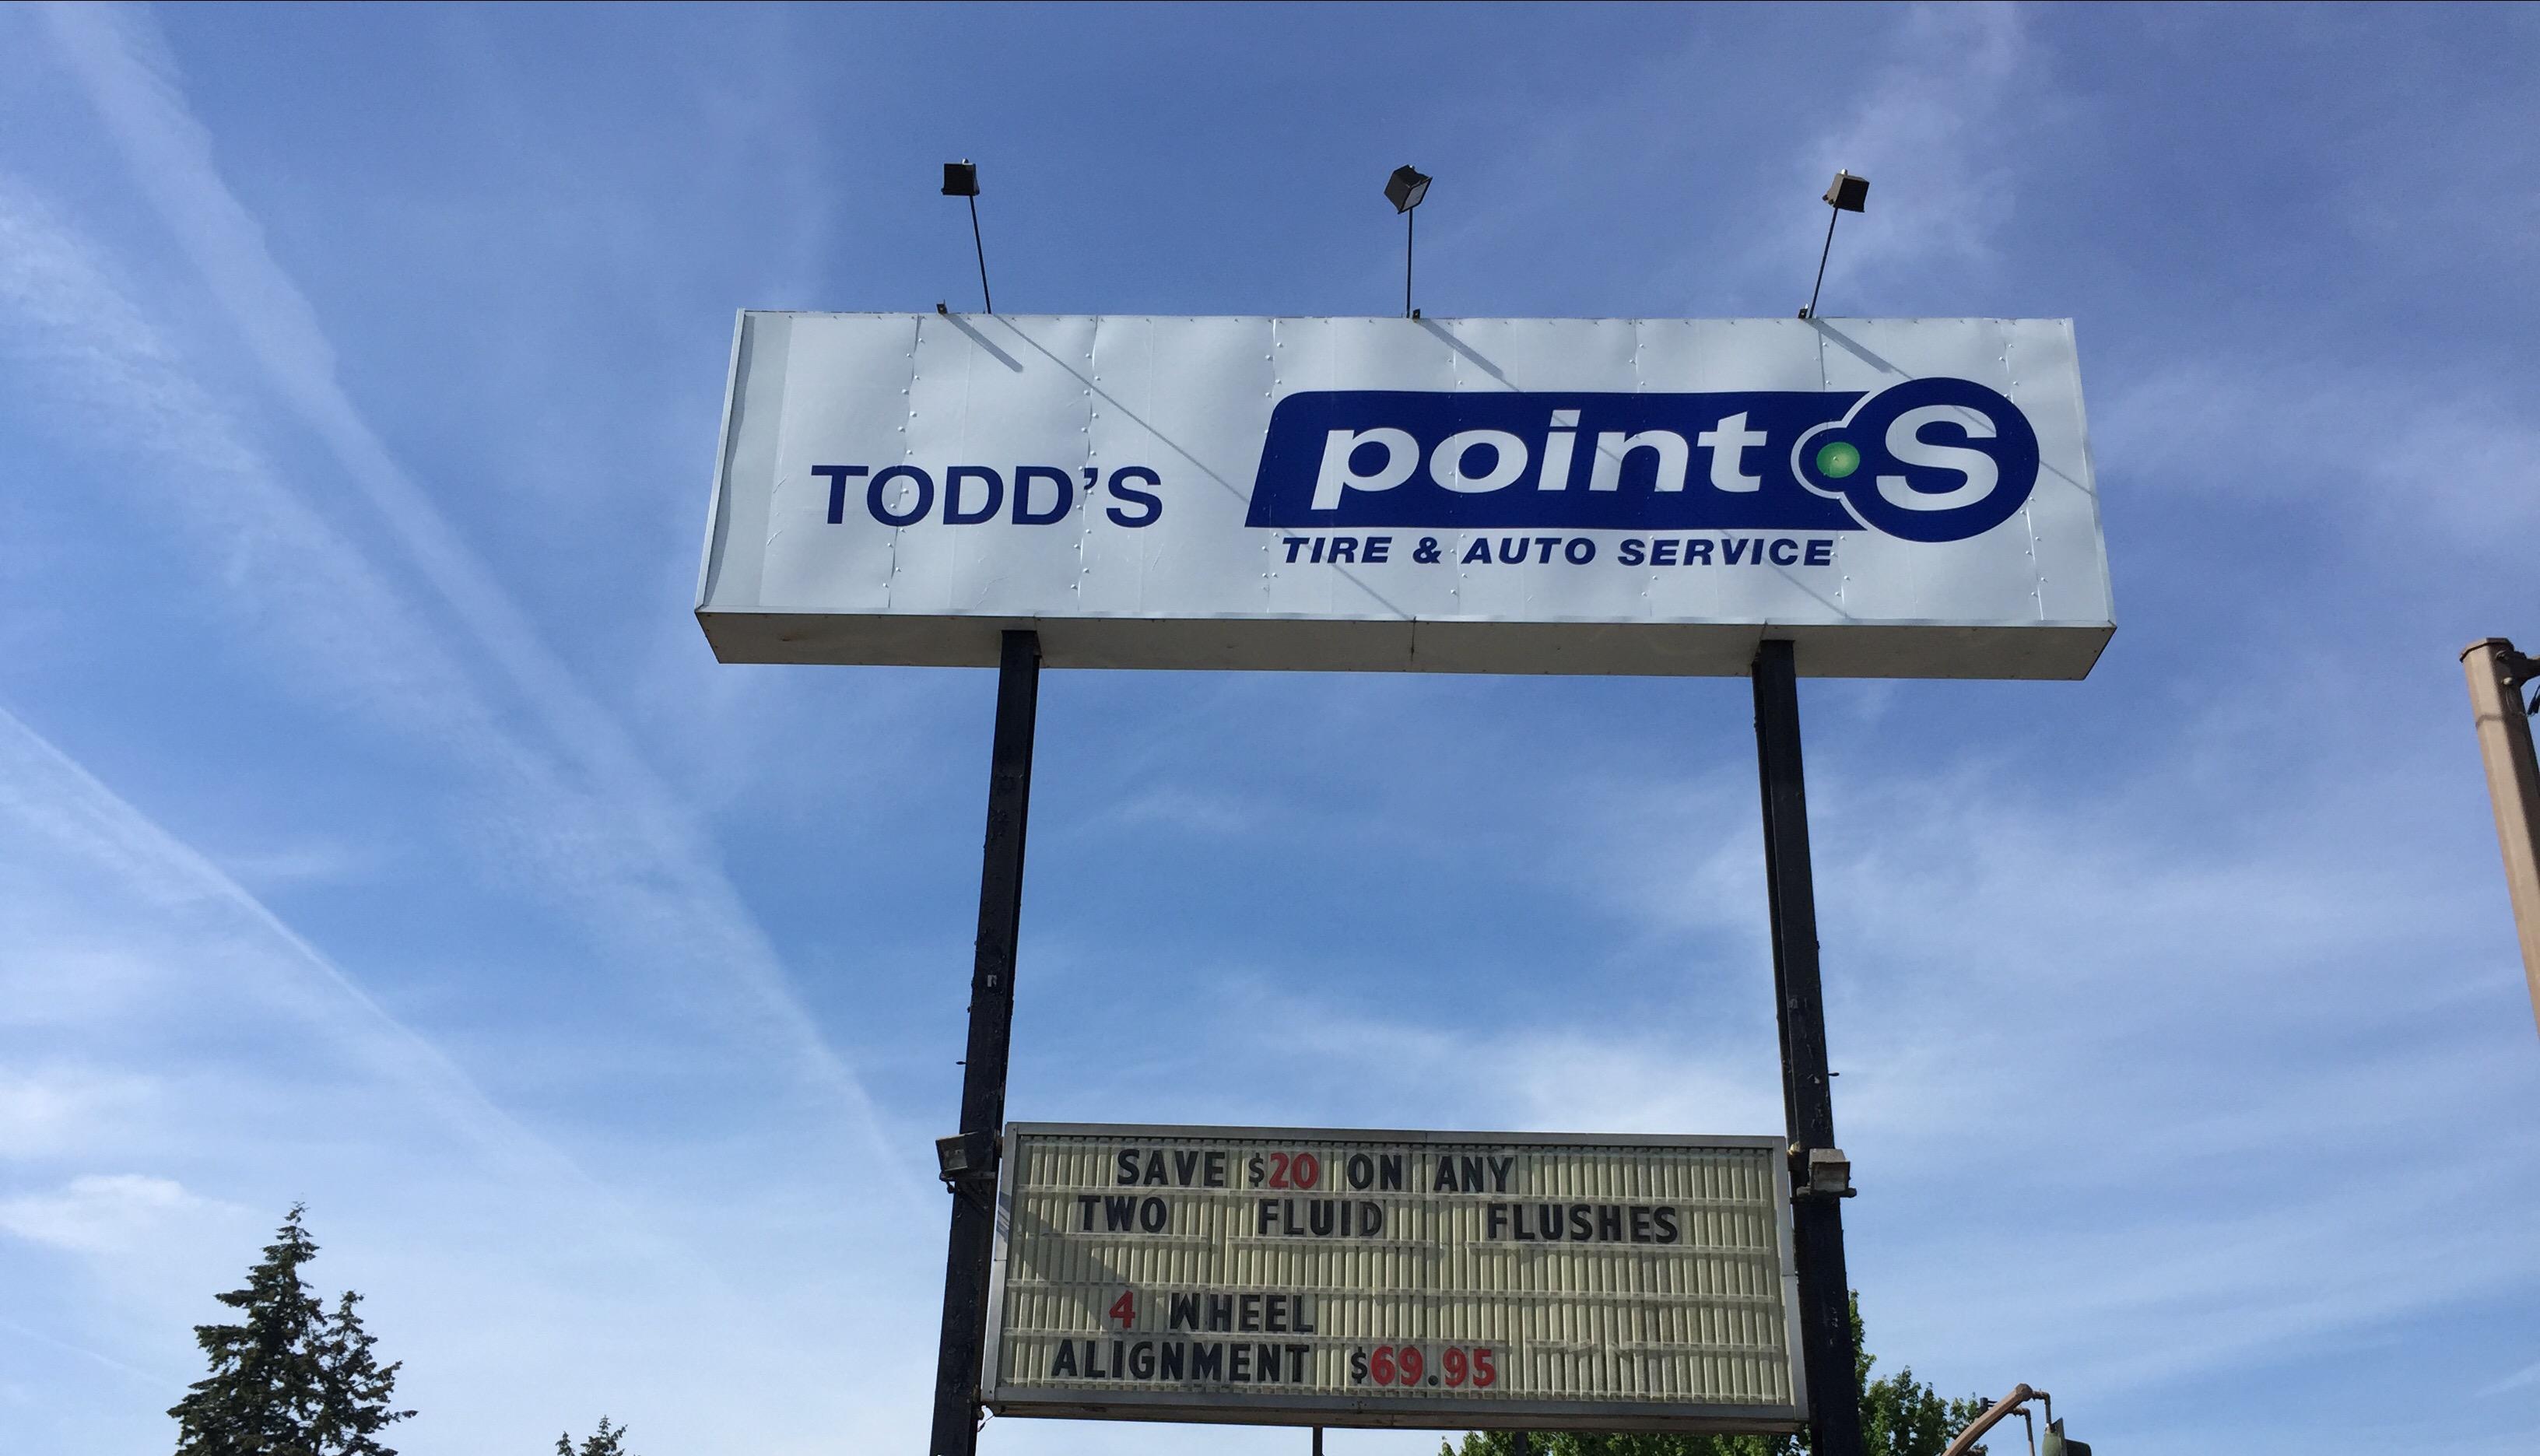 Todd's Point S Tire and Auto Service Photo